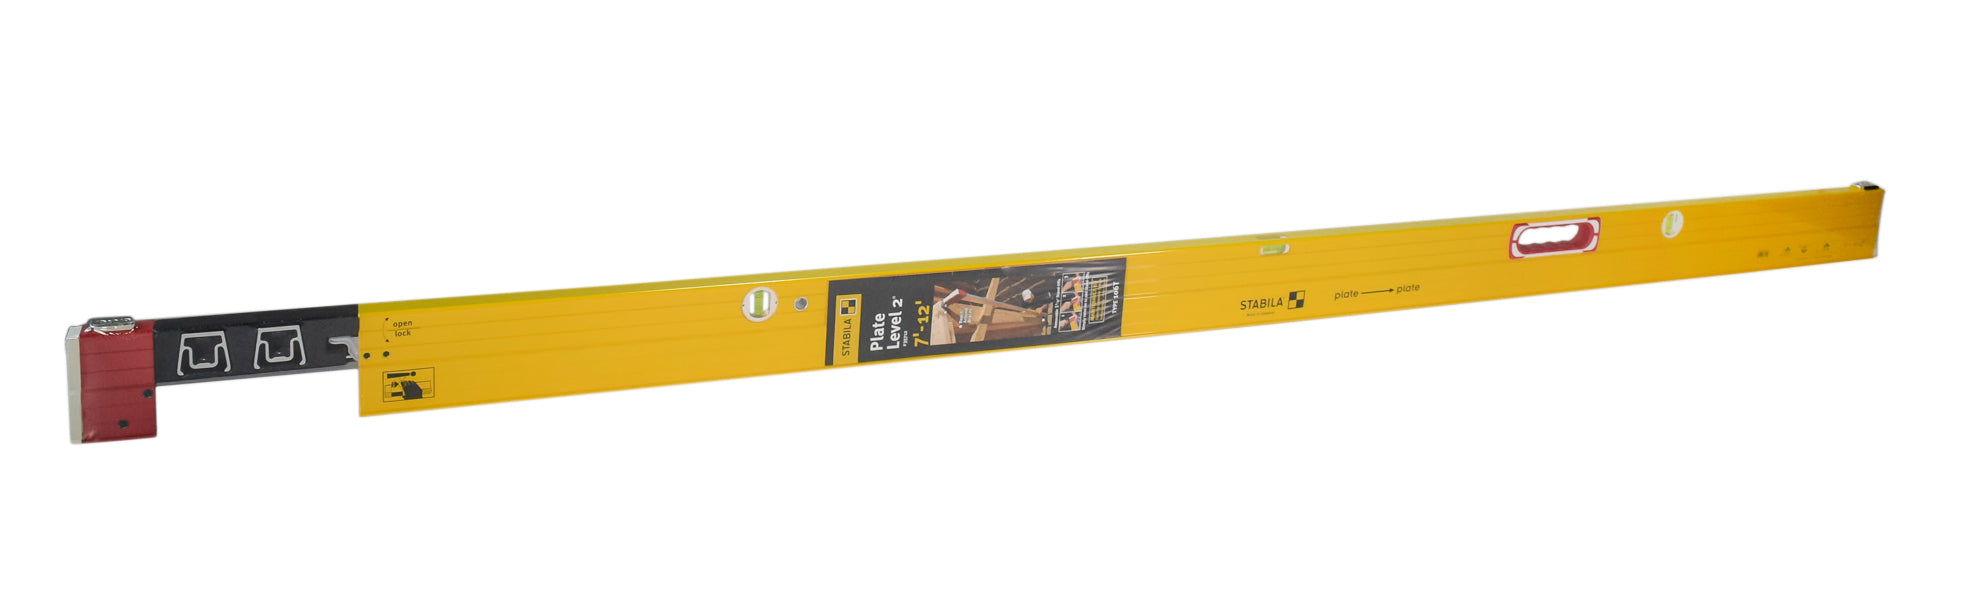 Stabila-35712-Type-106T-84-Inch-Extendable-Plate-Level-with-Hang-Hole-image-1